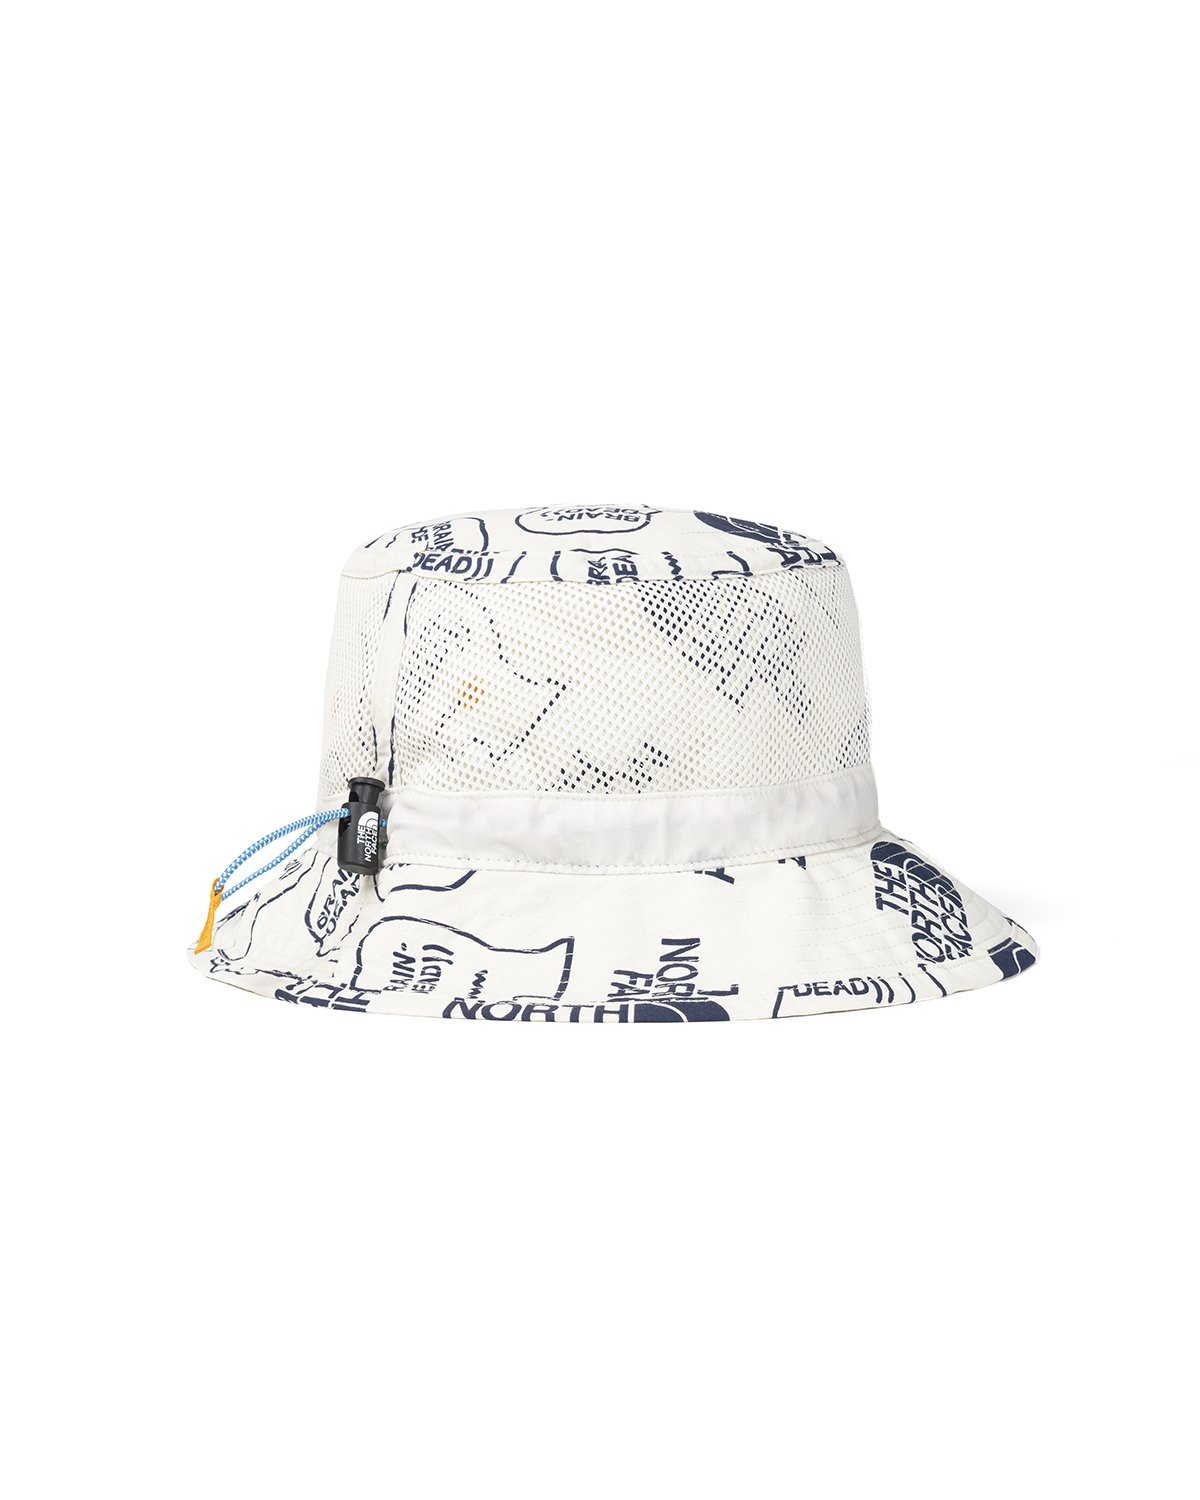 The North Face x Brain Dead Bucket Hat 